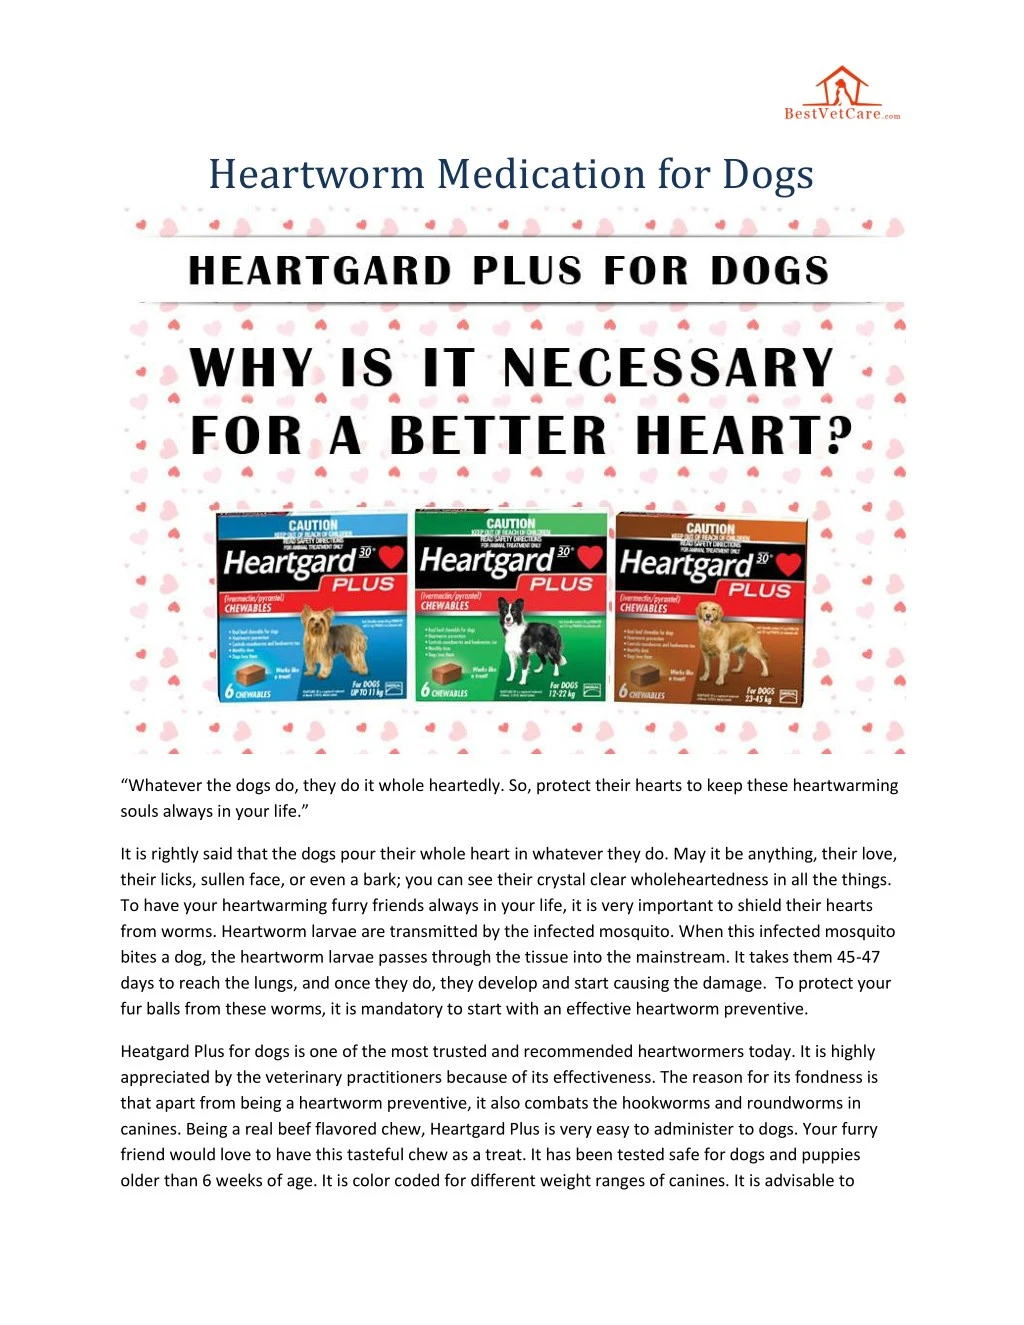 heartworm medication for dogs